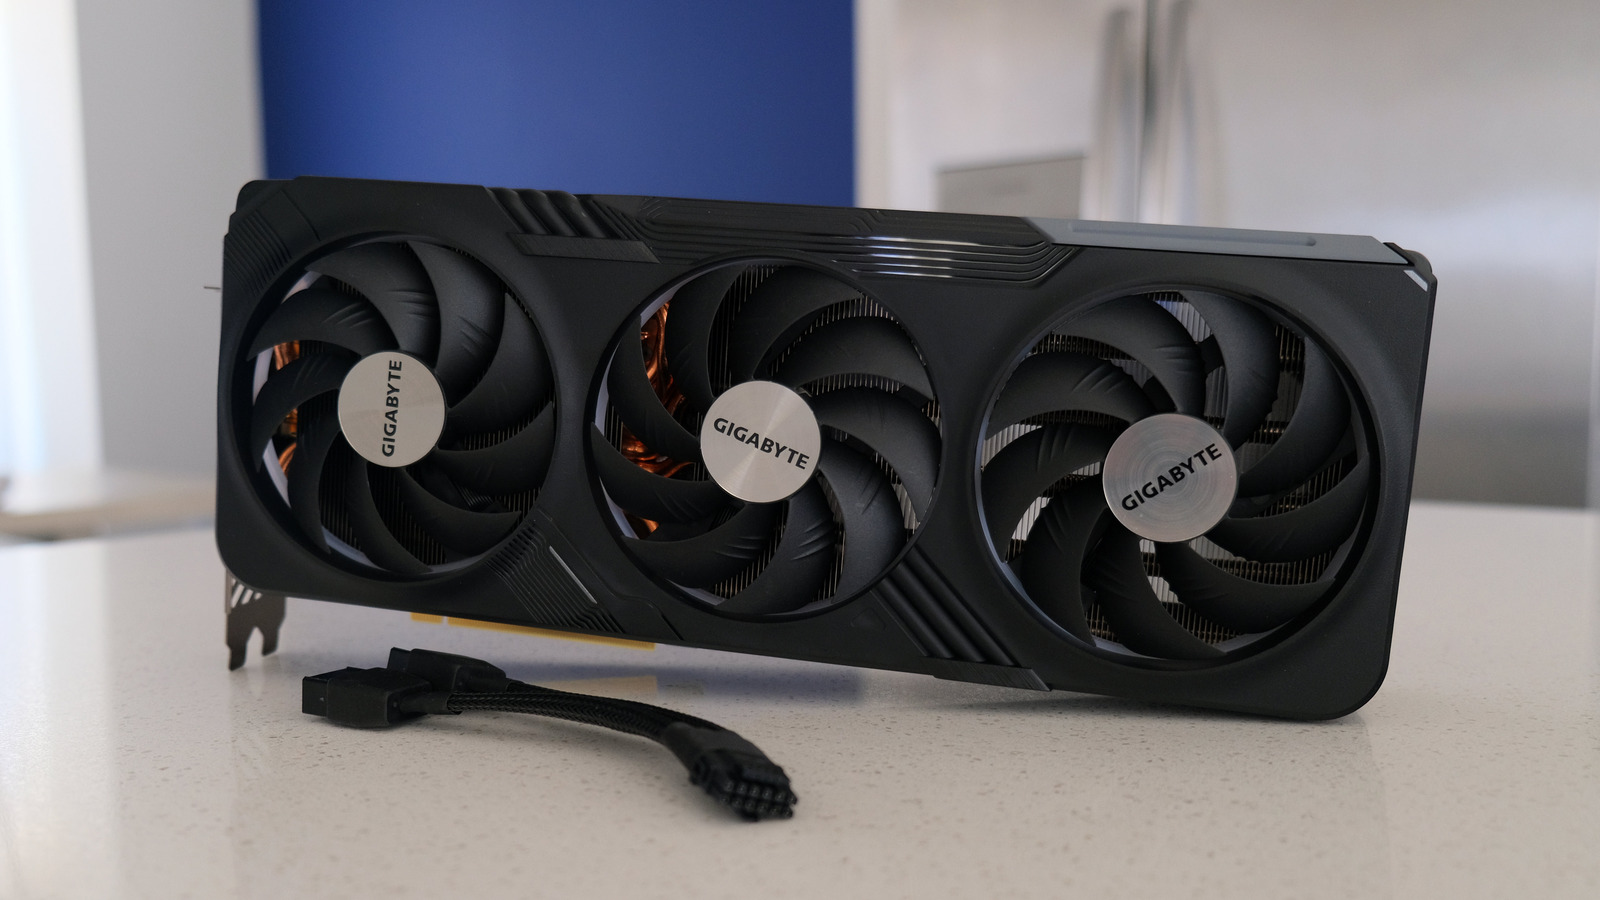 Gigabyte RTX 4080 Gaming OC - Unboxing & First Impressions 